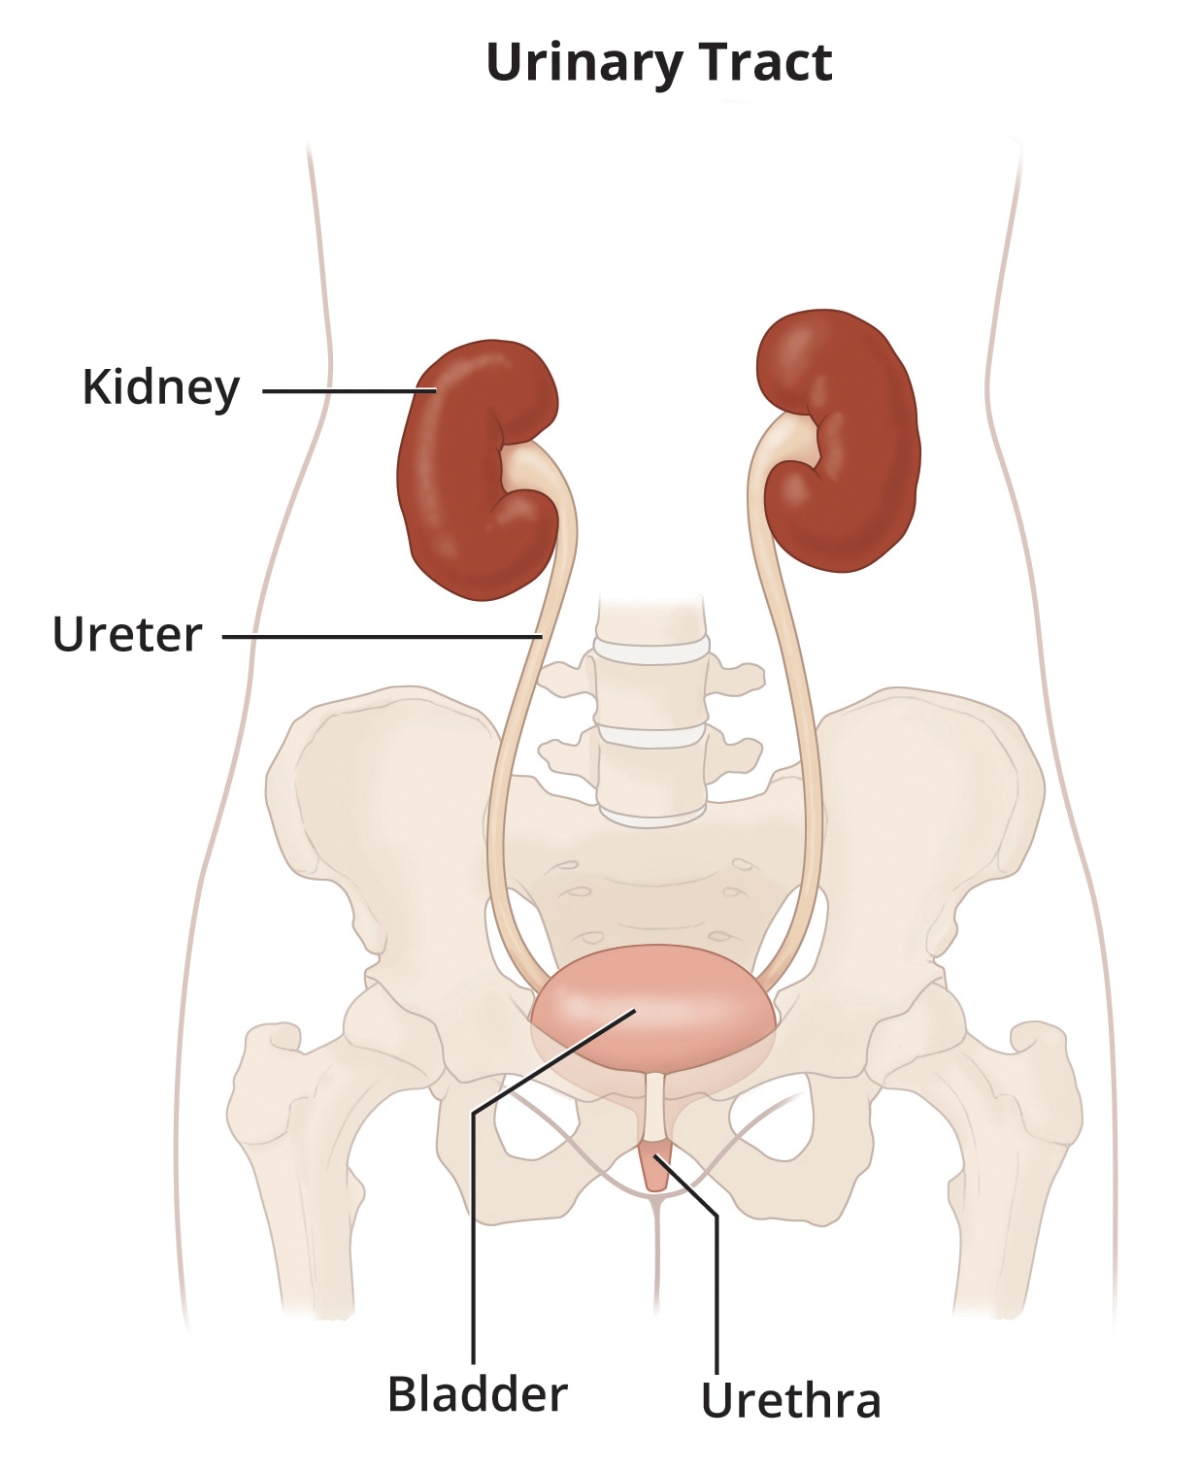 Urinary tract infection - Symptoms, Causes, Prevention, Treatment